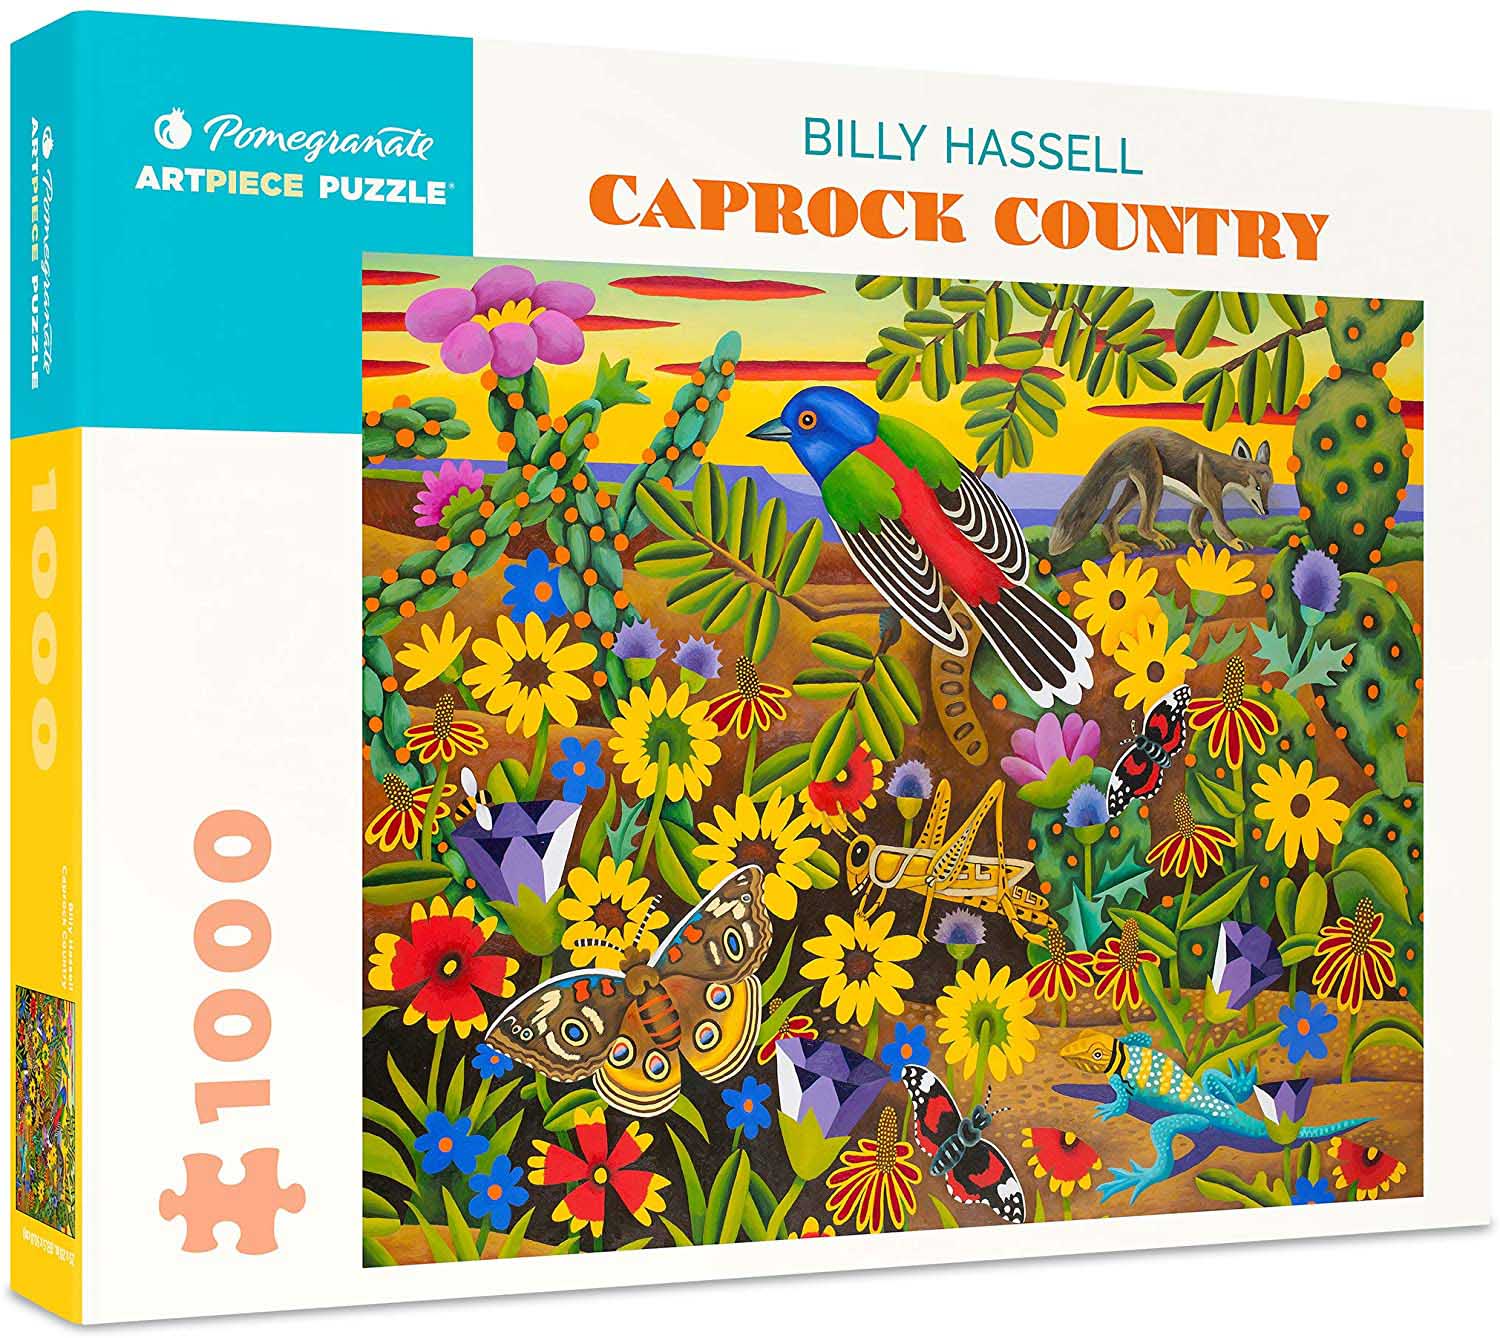 Caprock Country Birds Jigsaw Puzzle